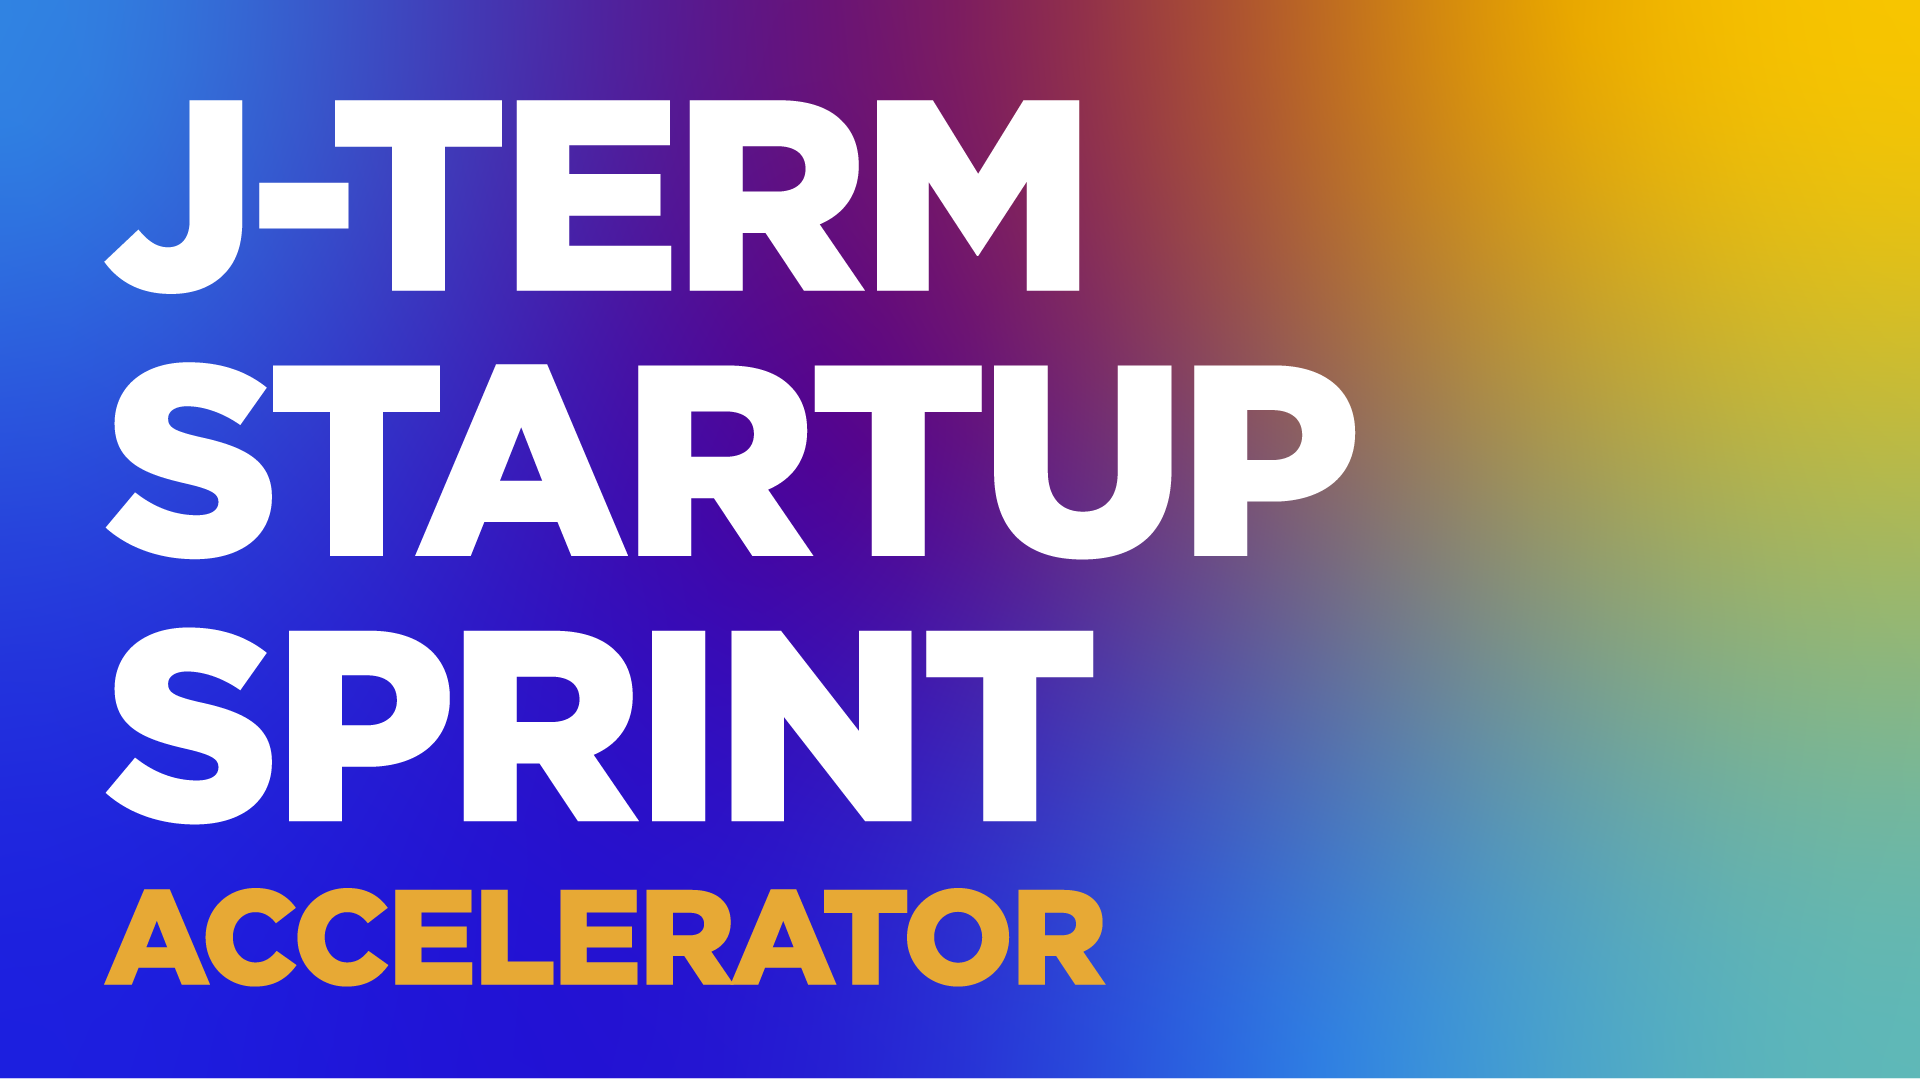 What's the JTerm Startup Sprint like? Learn more and apply! NYU